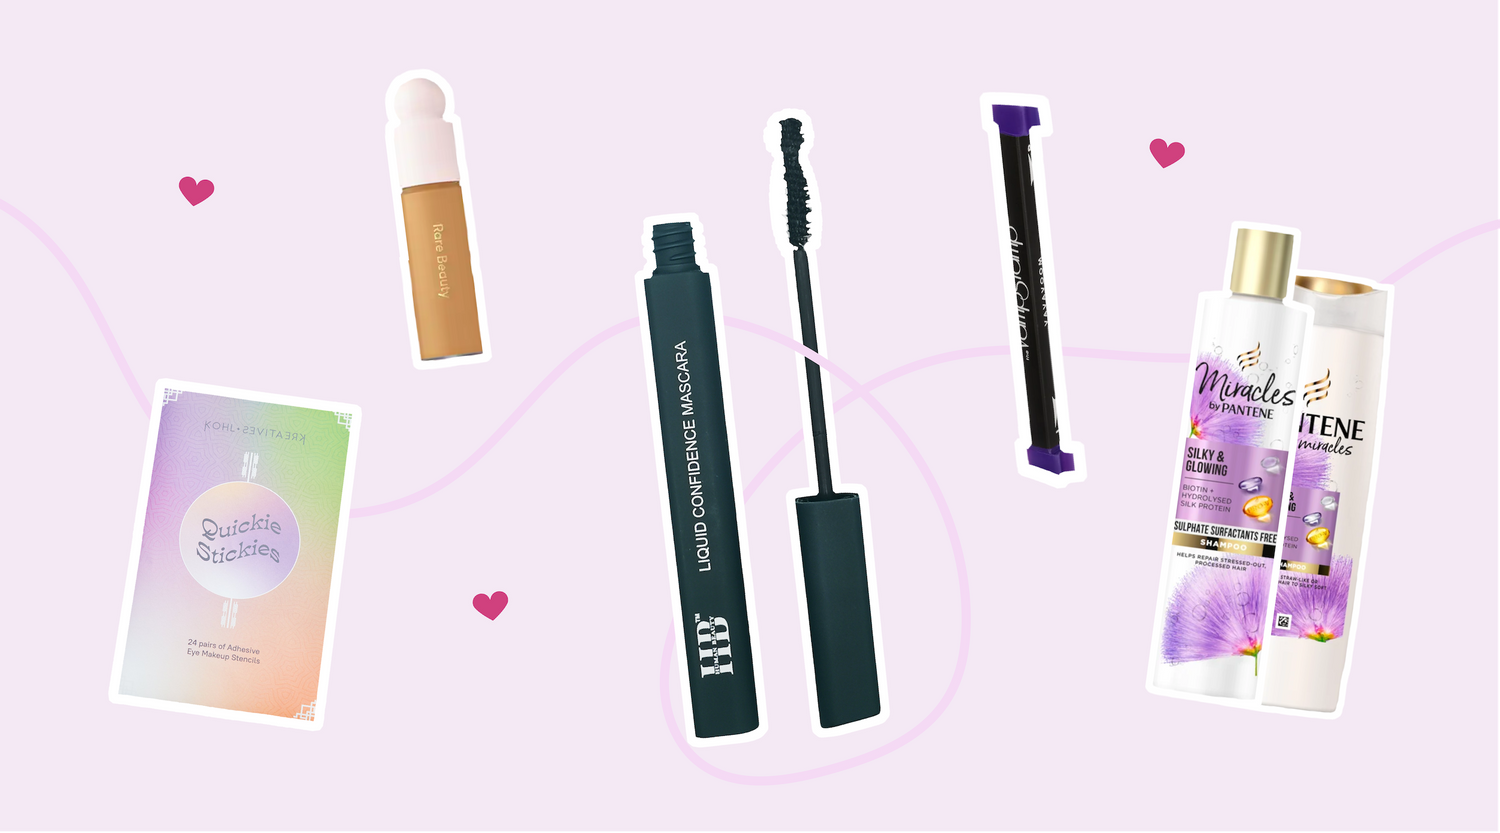 Header picture of differents products on a light purple background including the Makeup Therapy Liquid Confidence Mascara, the Rare Beauty foundation, The Kohl creatives stickers, the Vamp Stamp Va Va Voom stamp, and the Pantene silk and glowing line